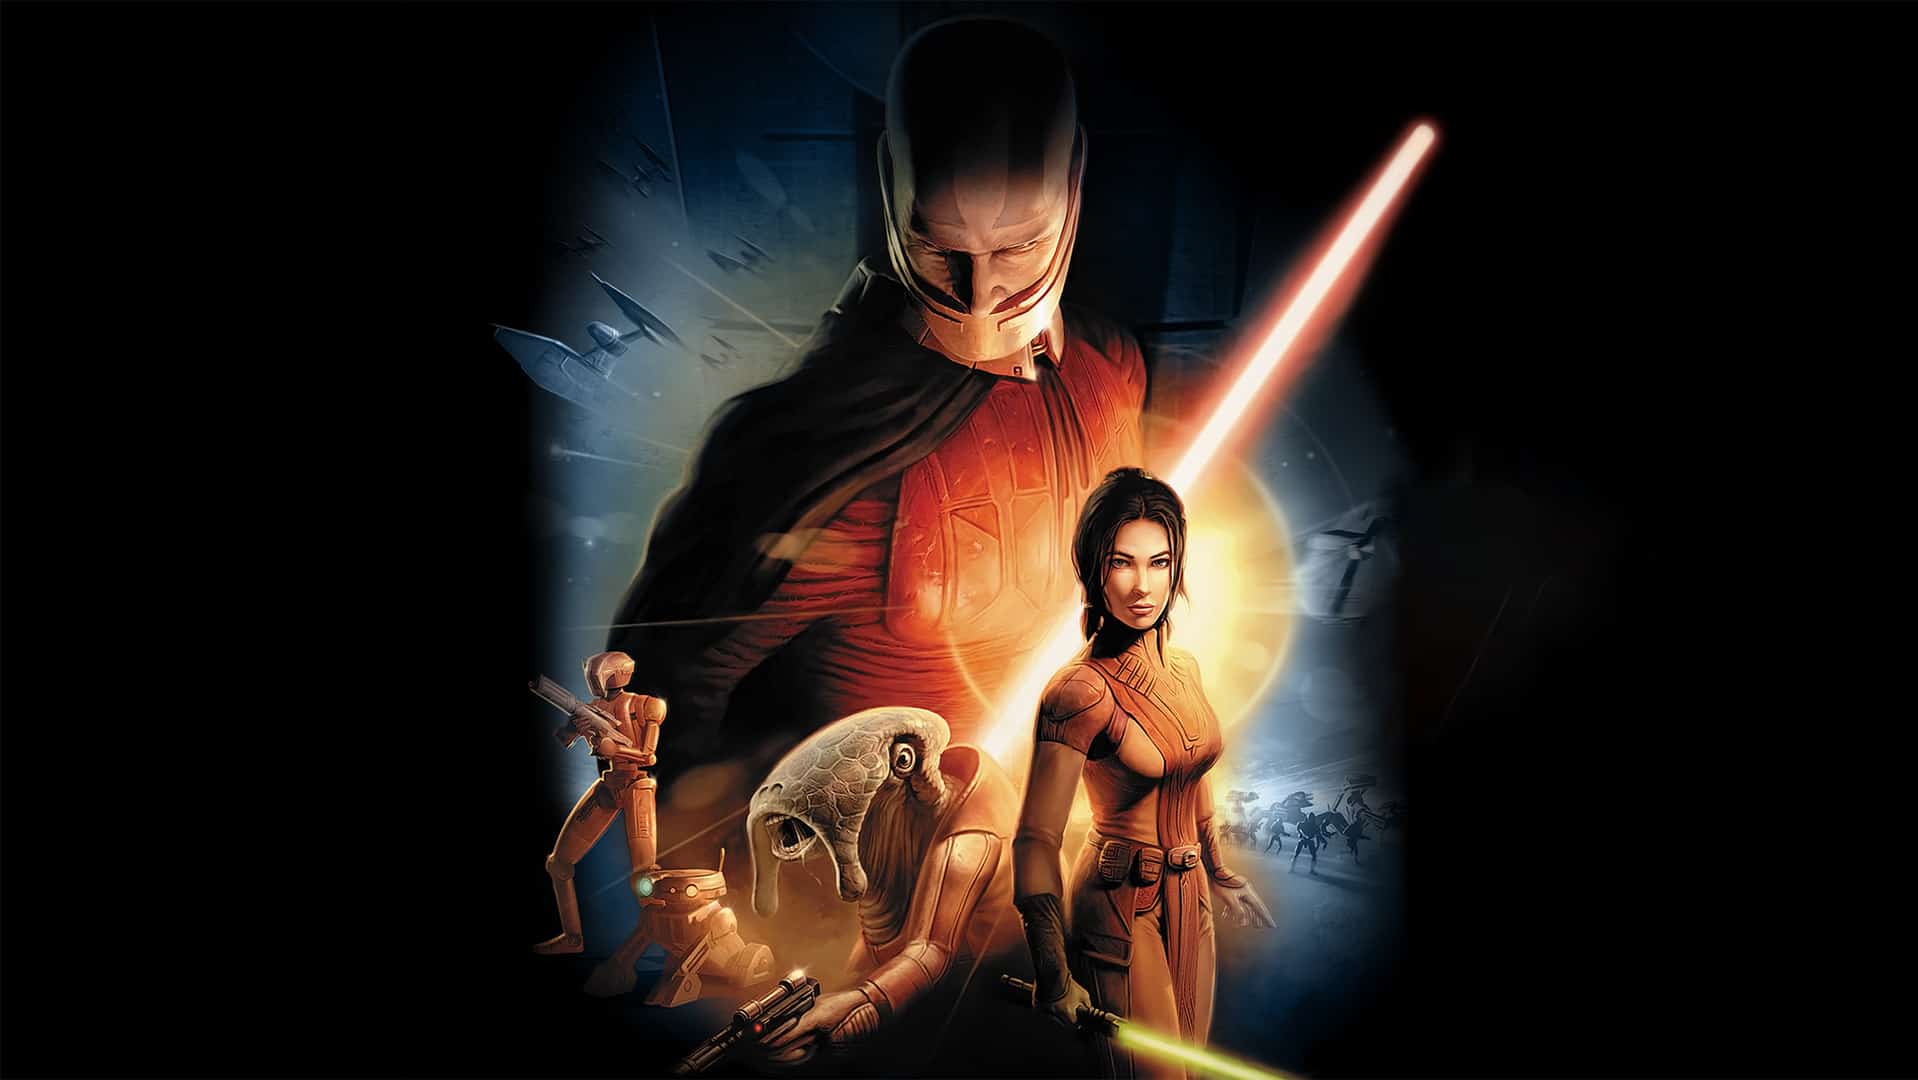 Rigel Ebot - (FanArt) KotOR - I have to see, with the Force, and my eyes.